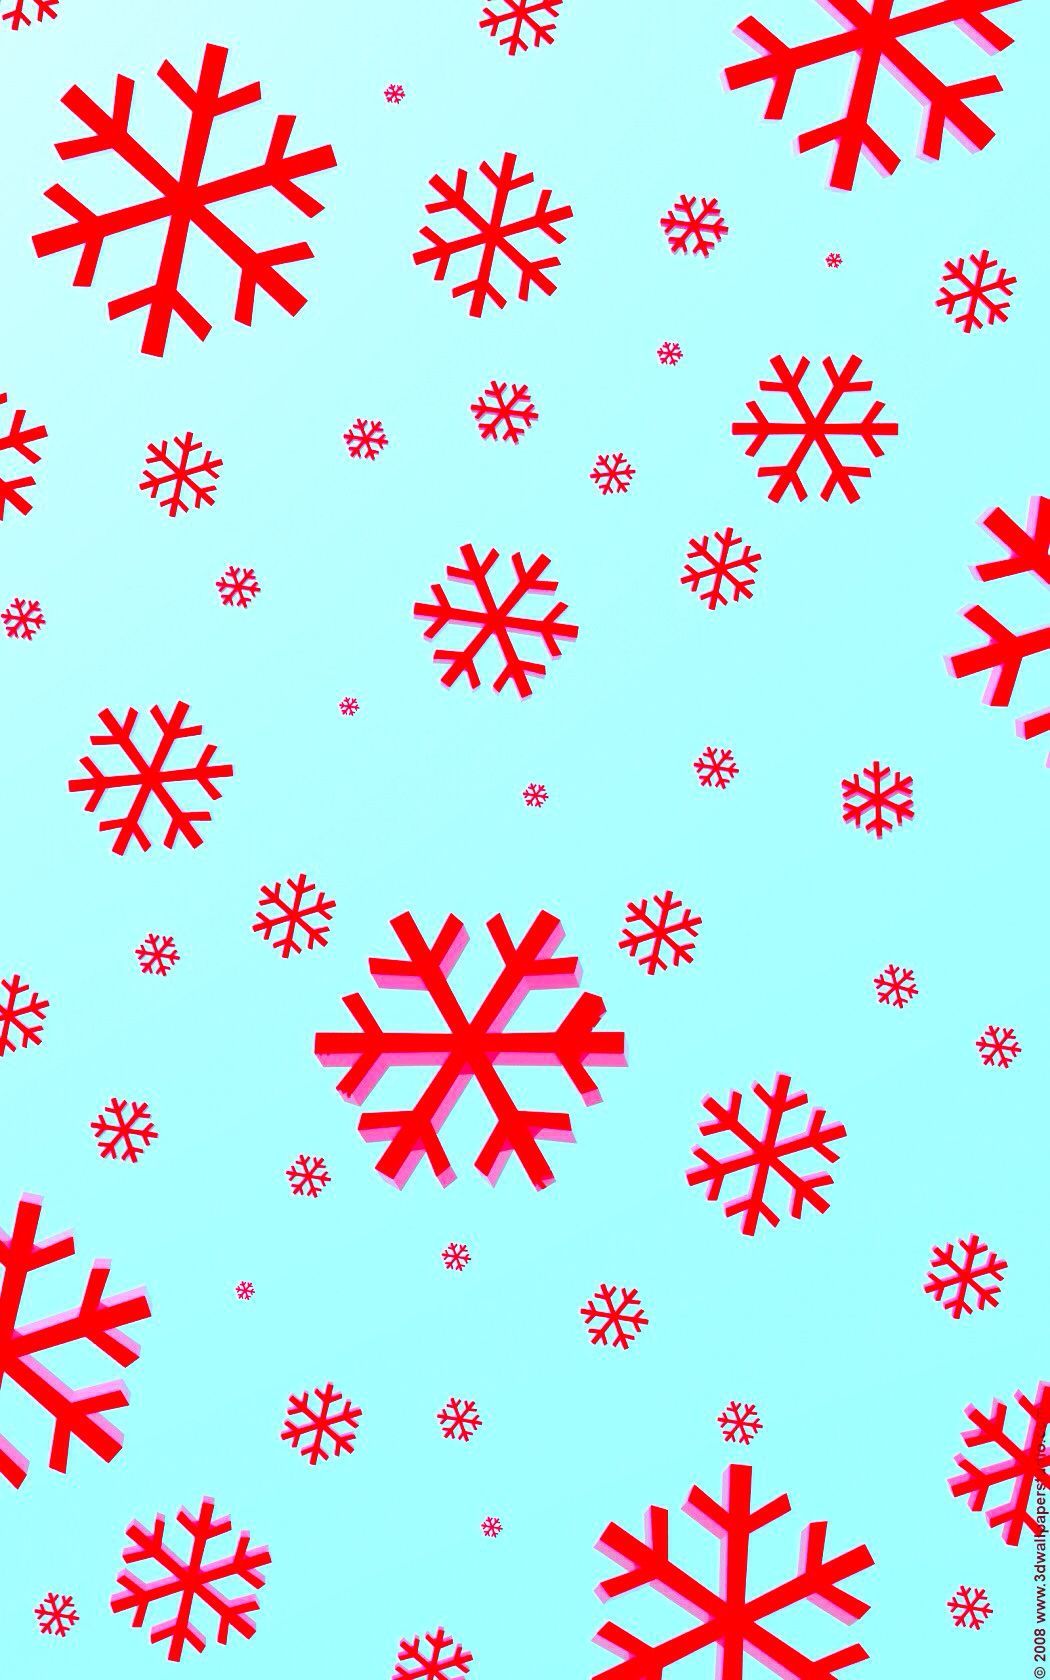 Bright red and blue snowflake iphone wallpaper. Wallpaper iphone christmas, iPhone wallpaper bright, Christmas phone wallpaper